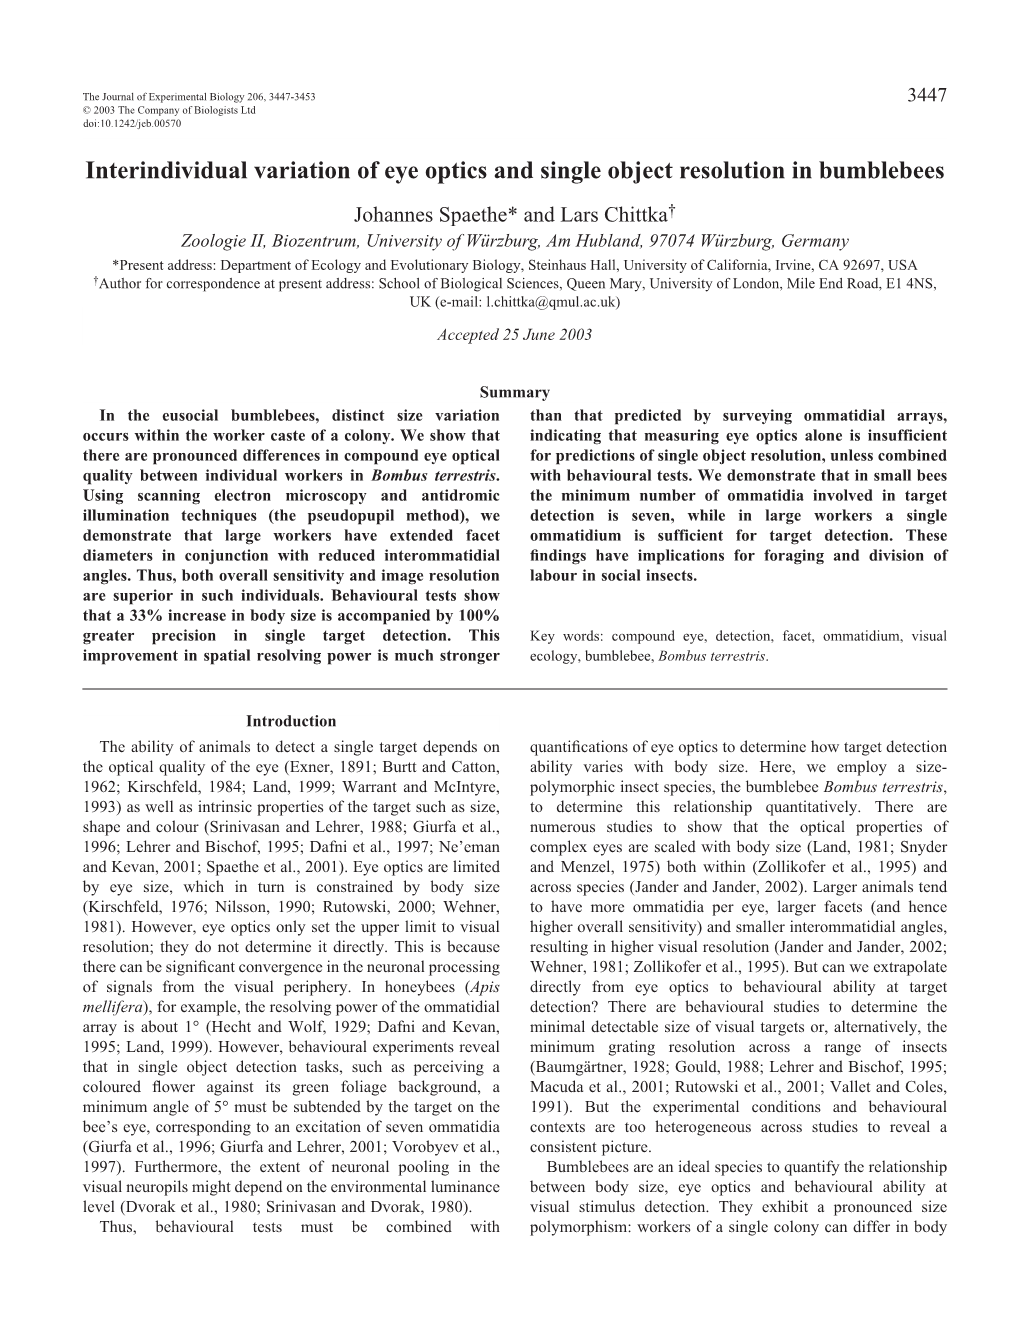 Interindividual Variation of Eye Optics and Single Object Resolution In